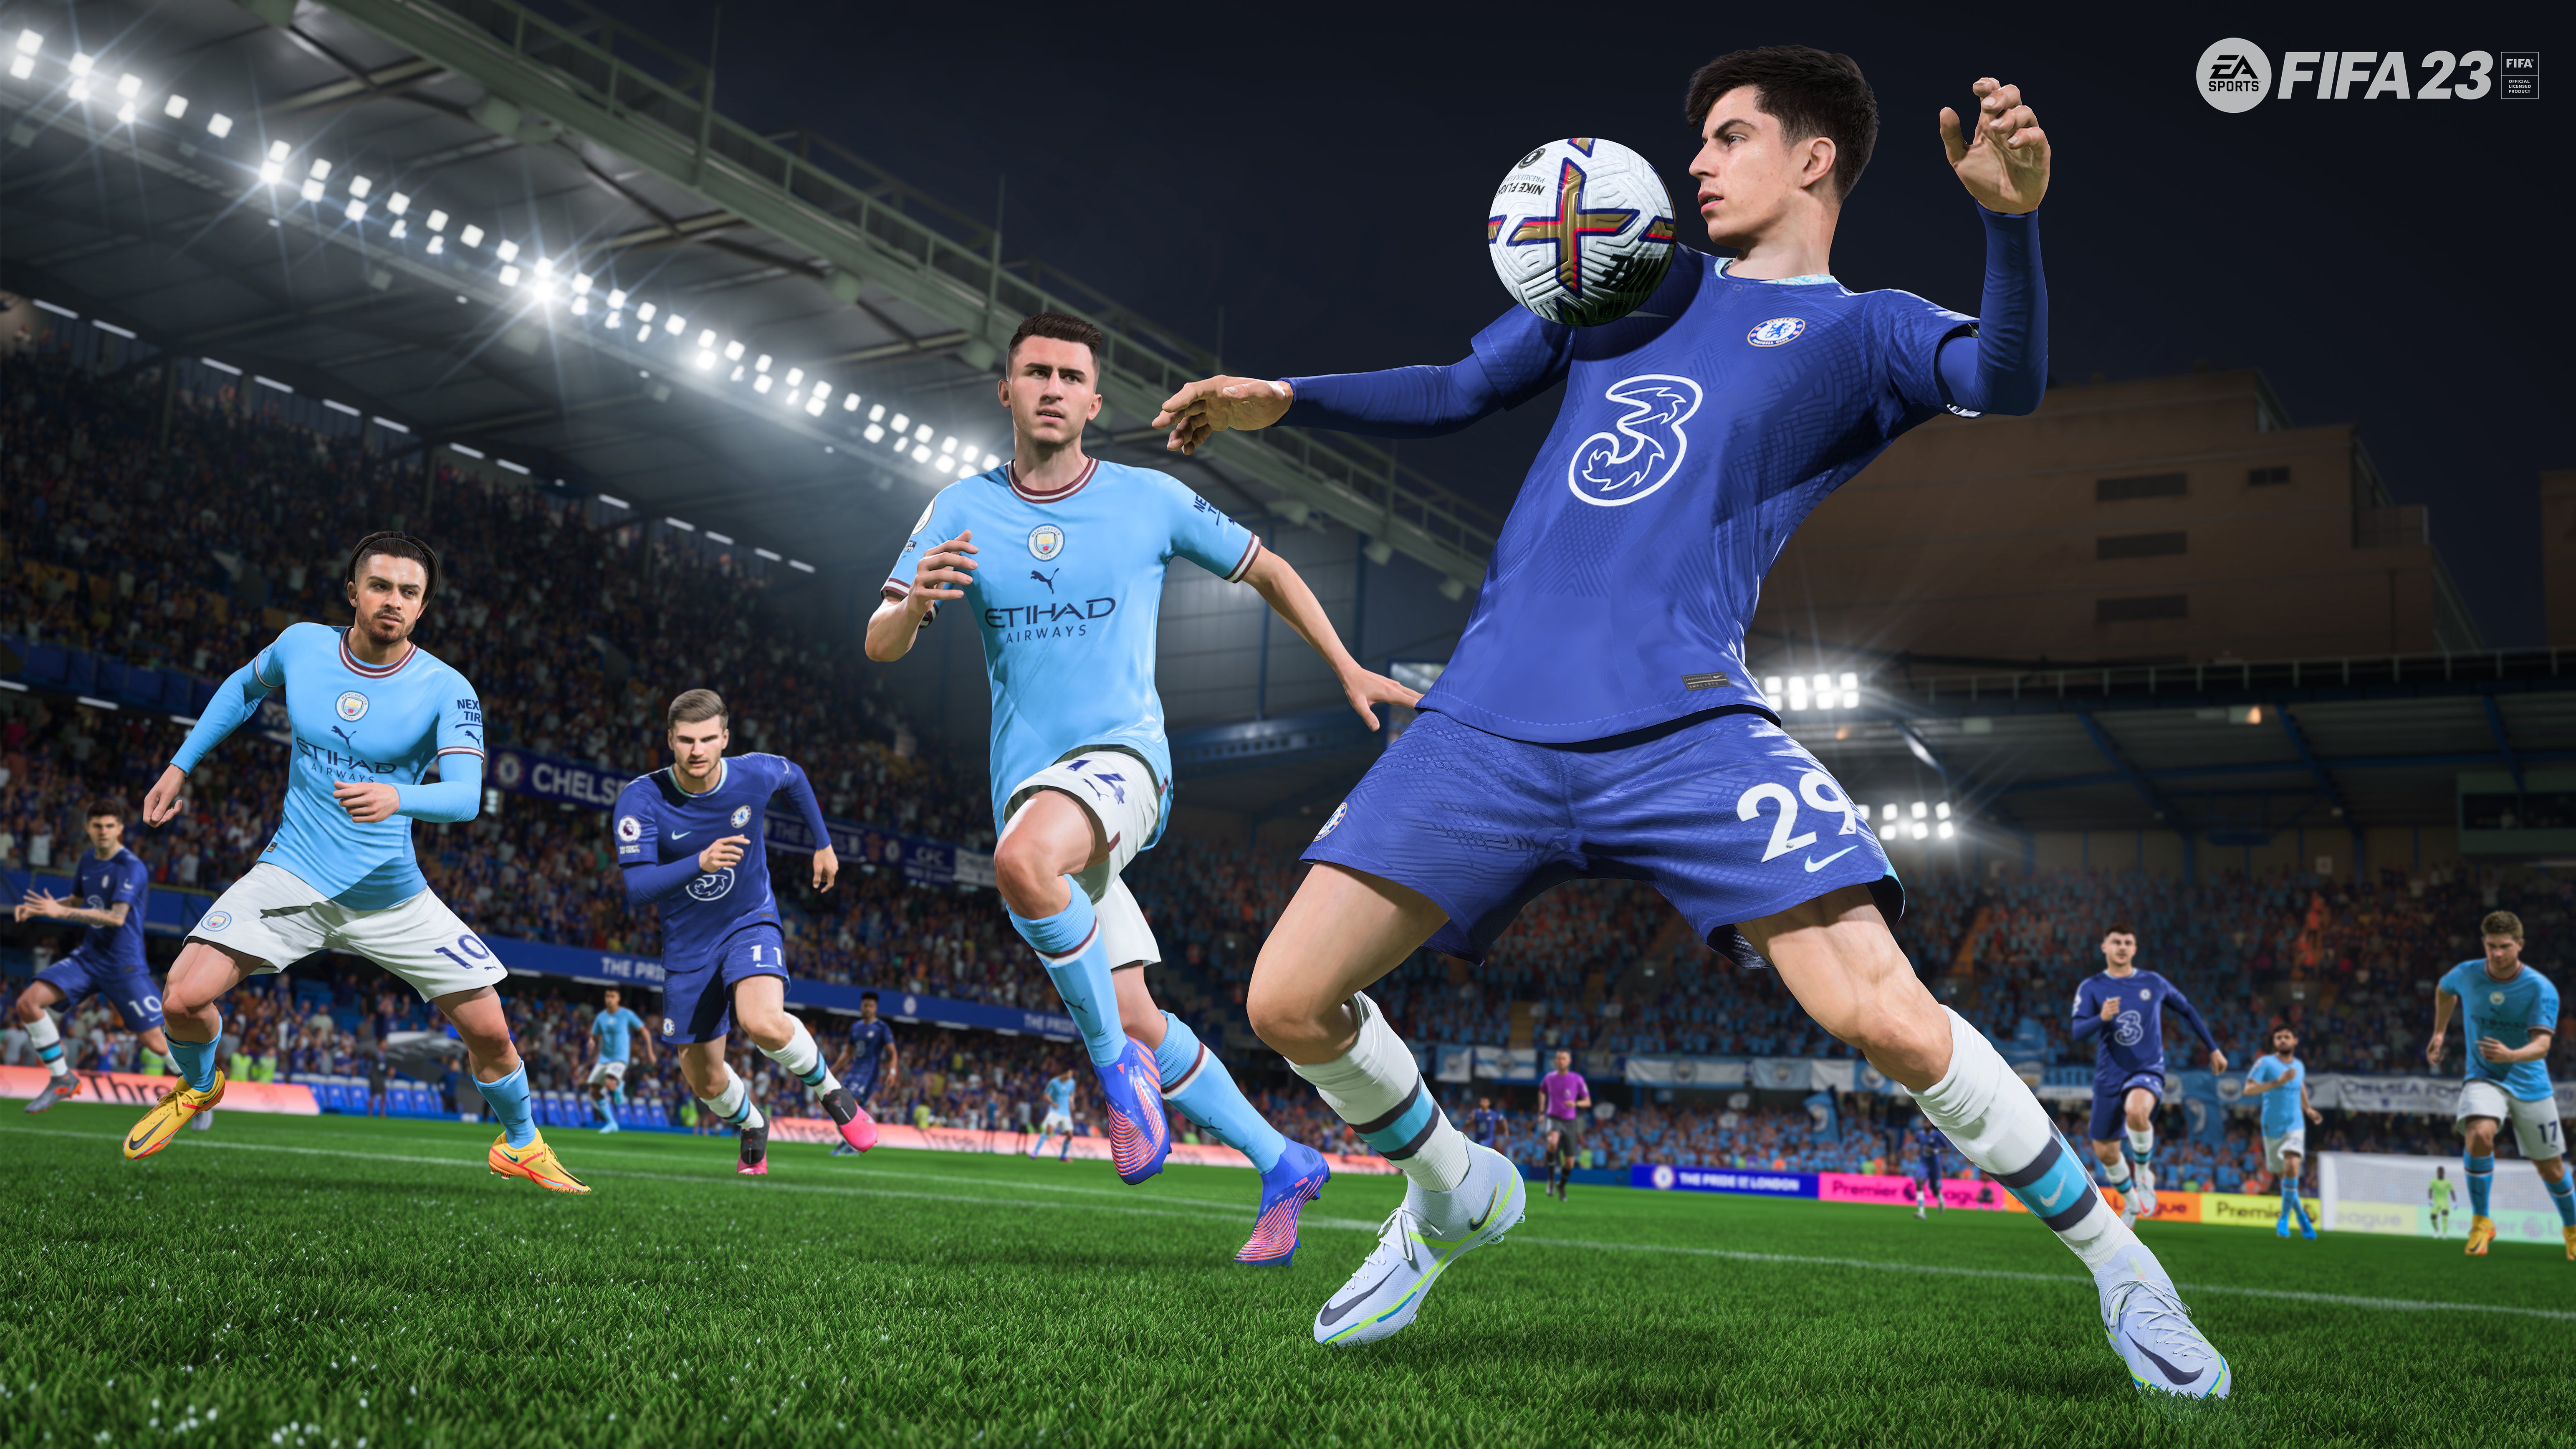 Finally! FIFA 23 on PC is the same as PS5 Xbox Series X and S | Eurogamer.net